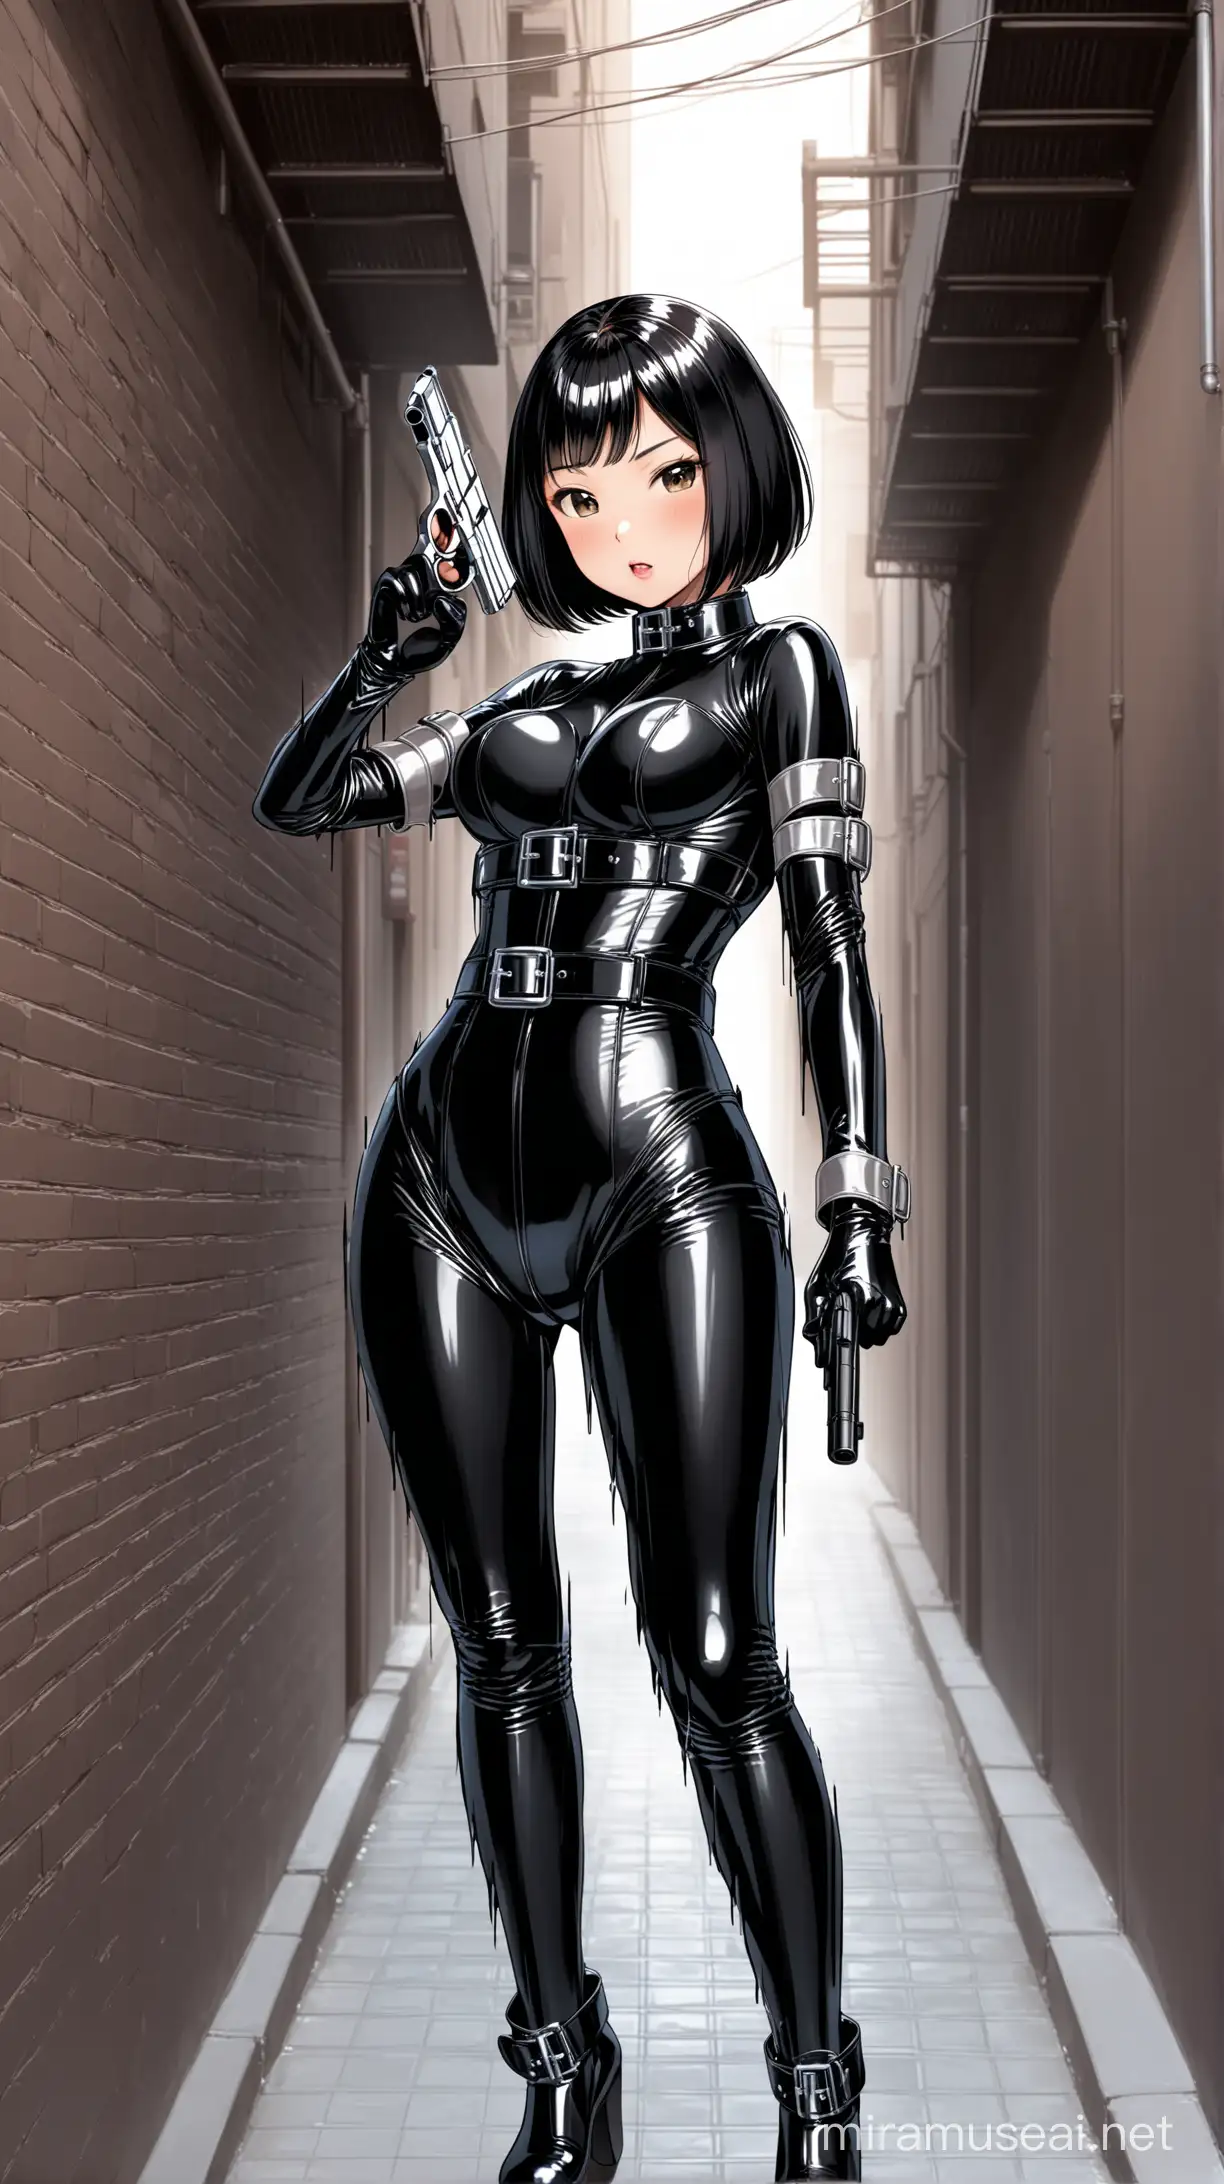 A cute Asian woman with a shot bob cut,  aiming a pistol, in an alleyway, wearing a shiny black catsuit, closed catsuit, gloves, a corset with silver buckles,wearing a glossy black catsuit. neck collar, fetish corset. long gloves, arm straps. many belts. thigh straps. heavy rubber outfit. fetish wear. solo.